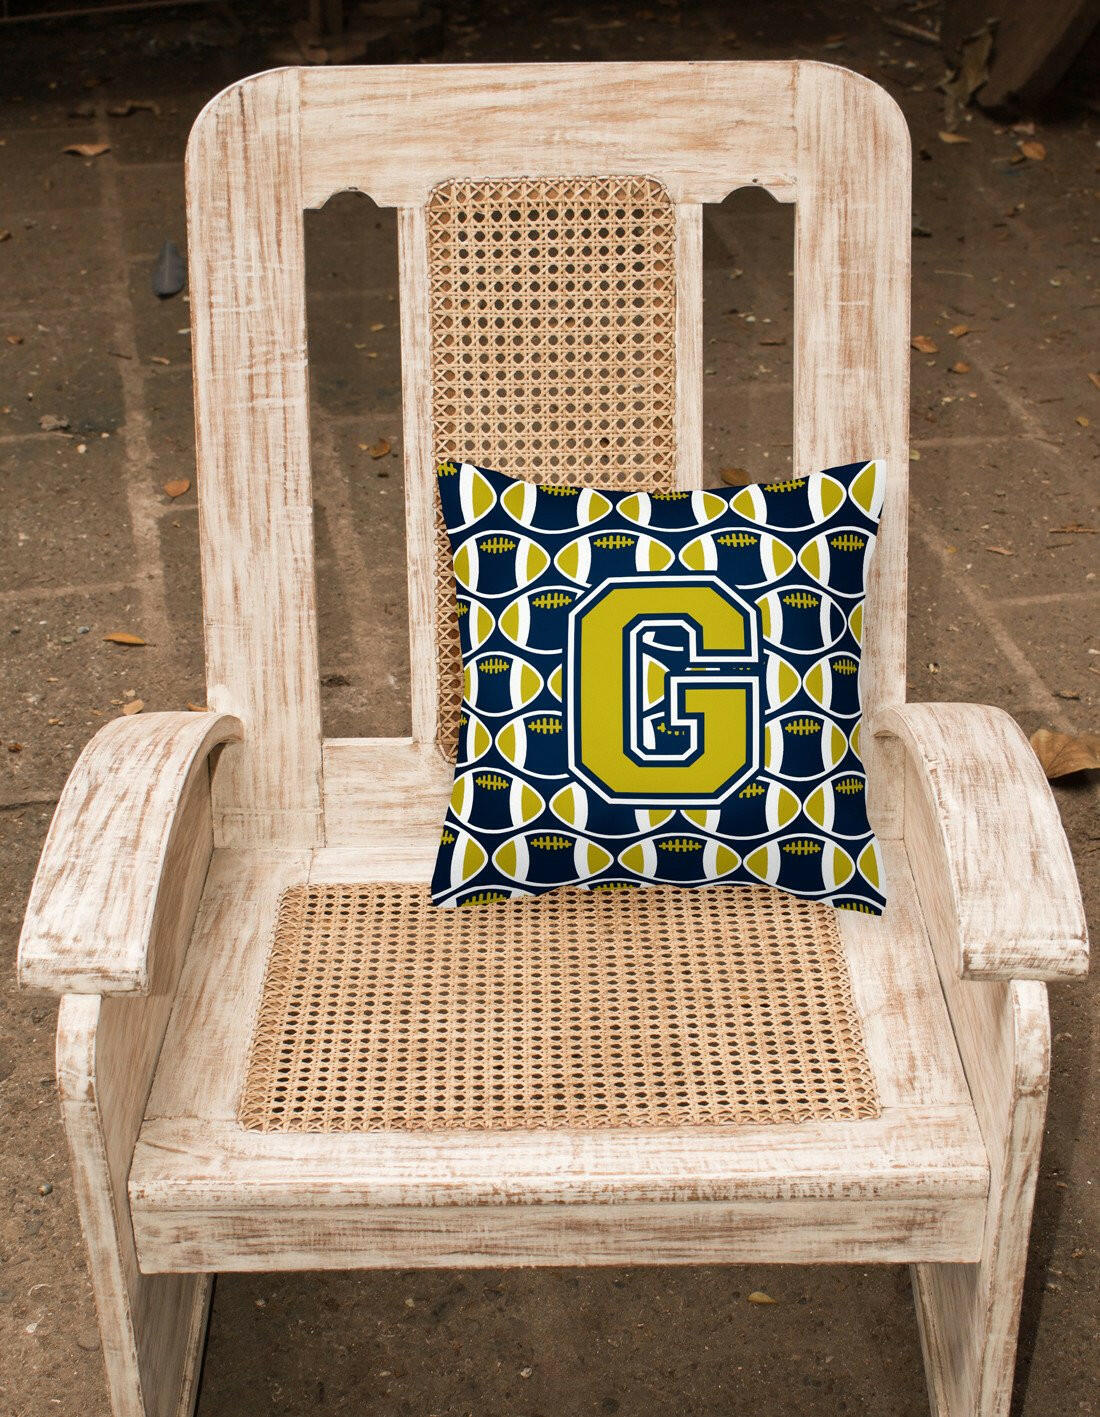 Letter G Football Blue and Gold Fabric Decorative Pillow CJ1074-GPW1414 by Caroline's Treasures